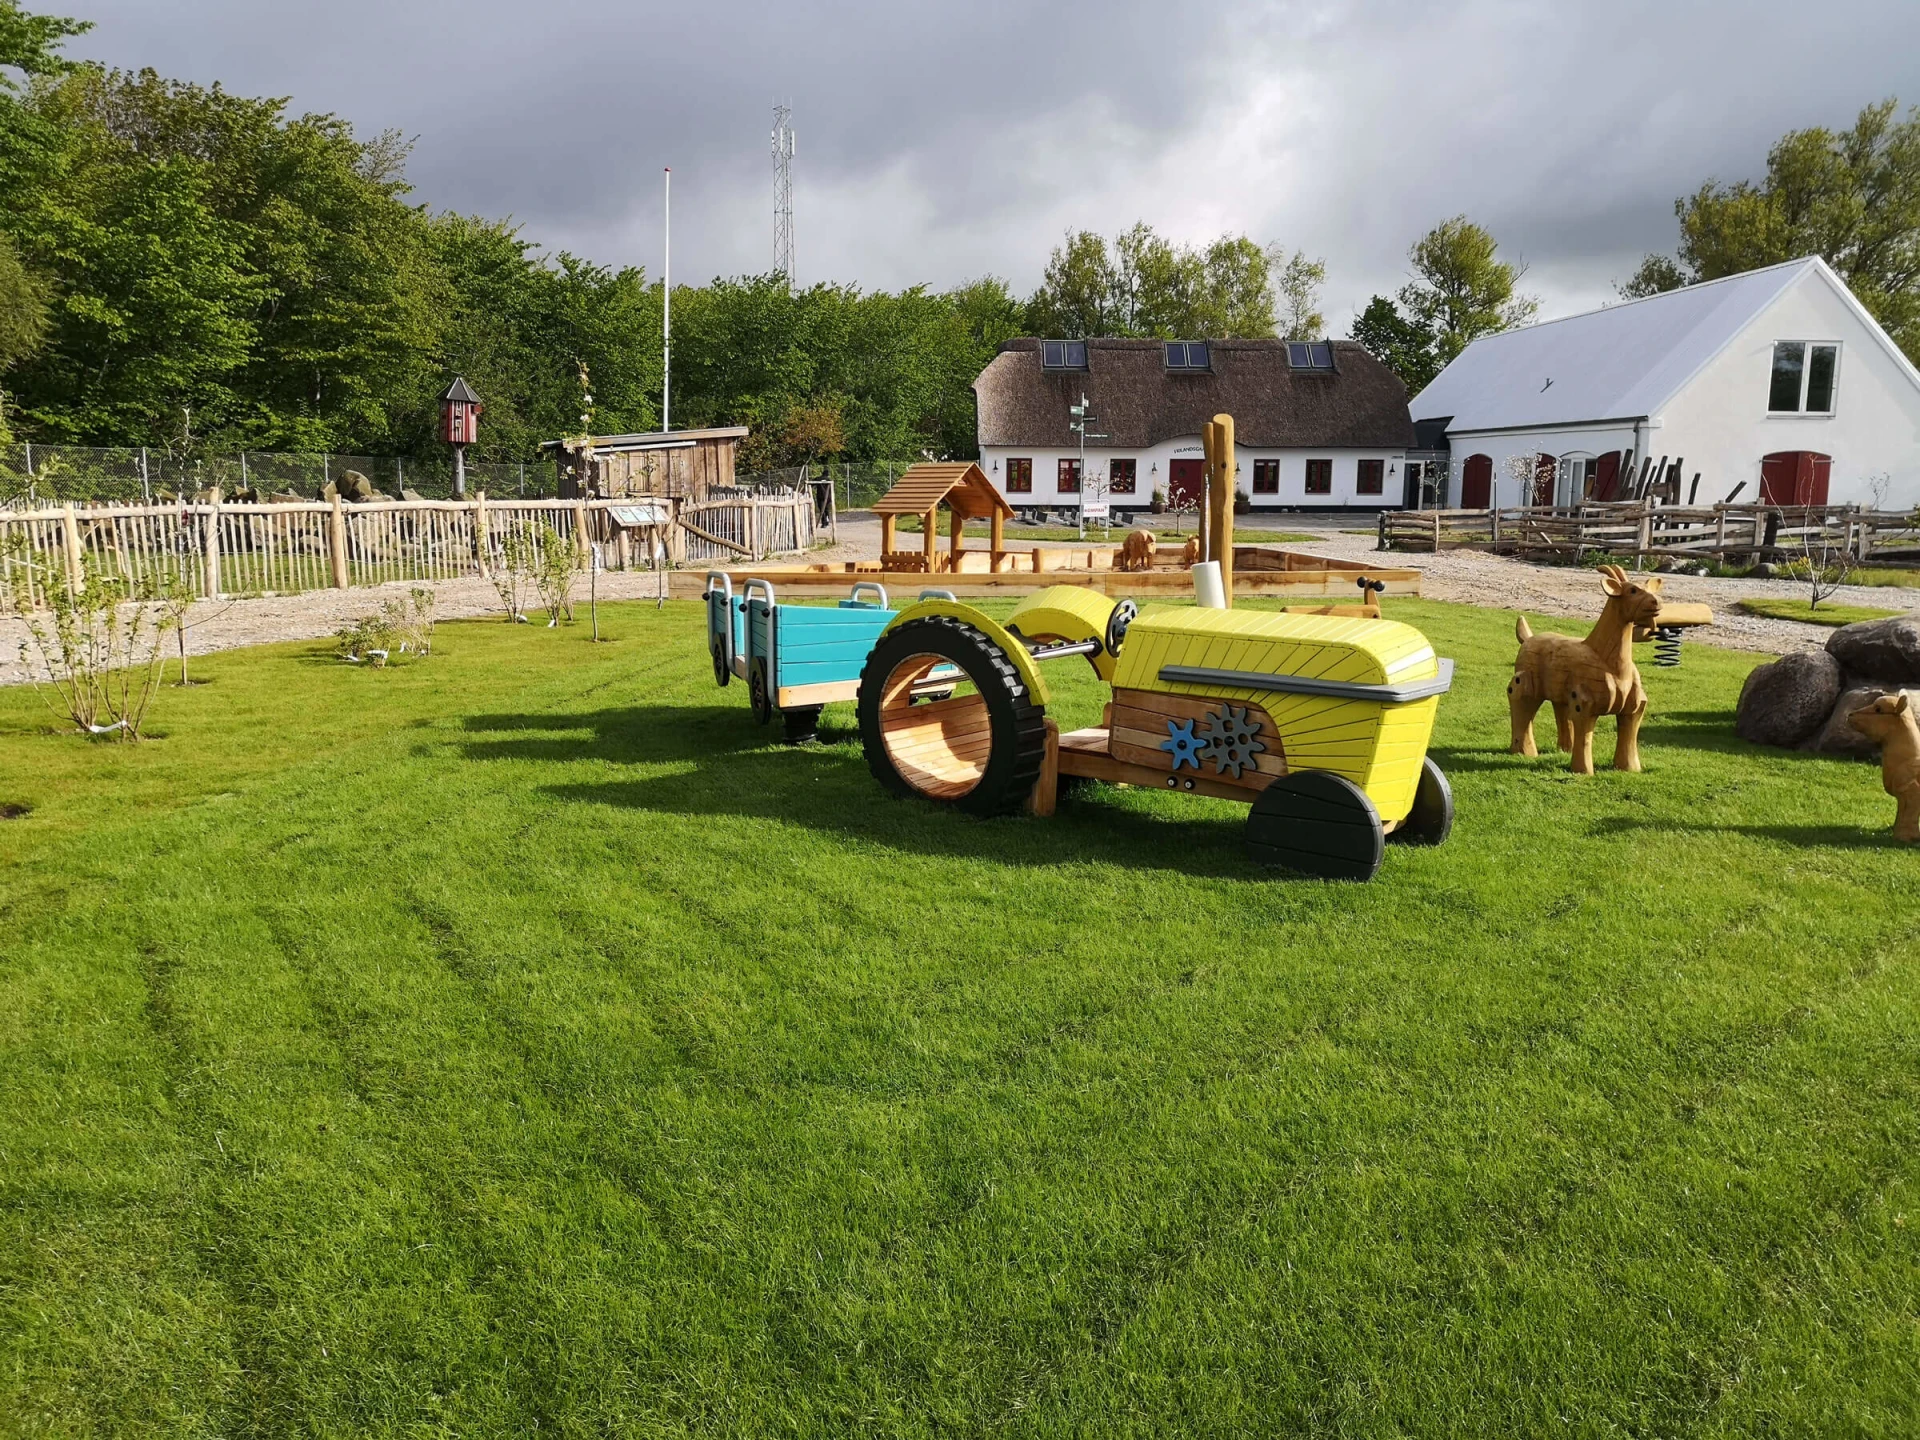 Small themed playground with wooden tractor and animals